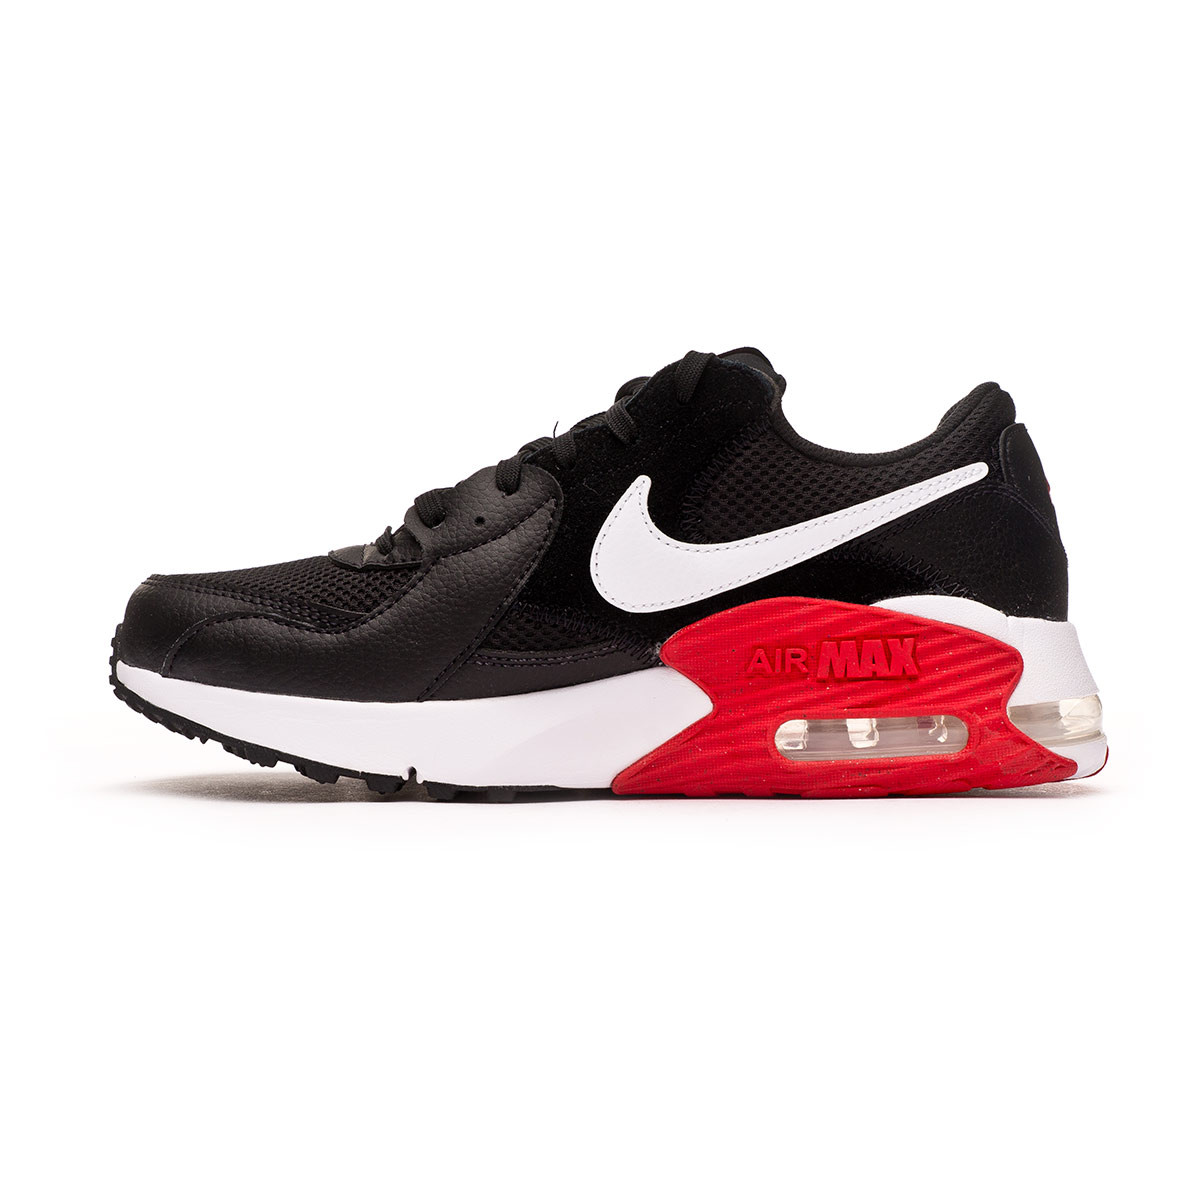 Trainers Nike Air Max Excee Black-White-University red - Fútbol Emotion